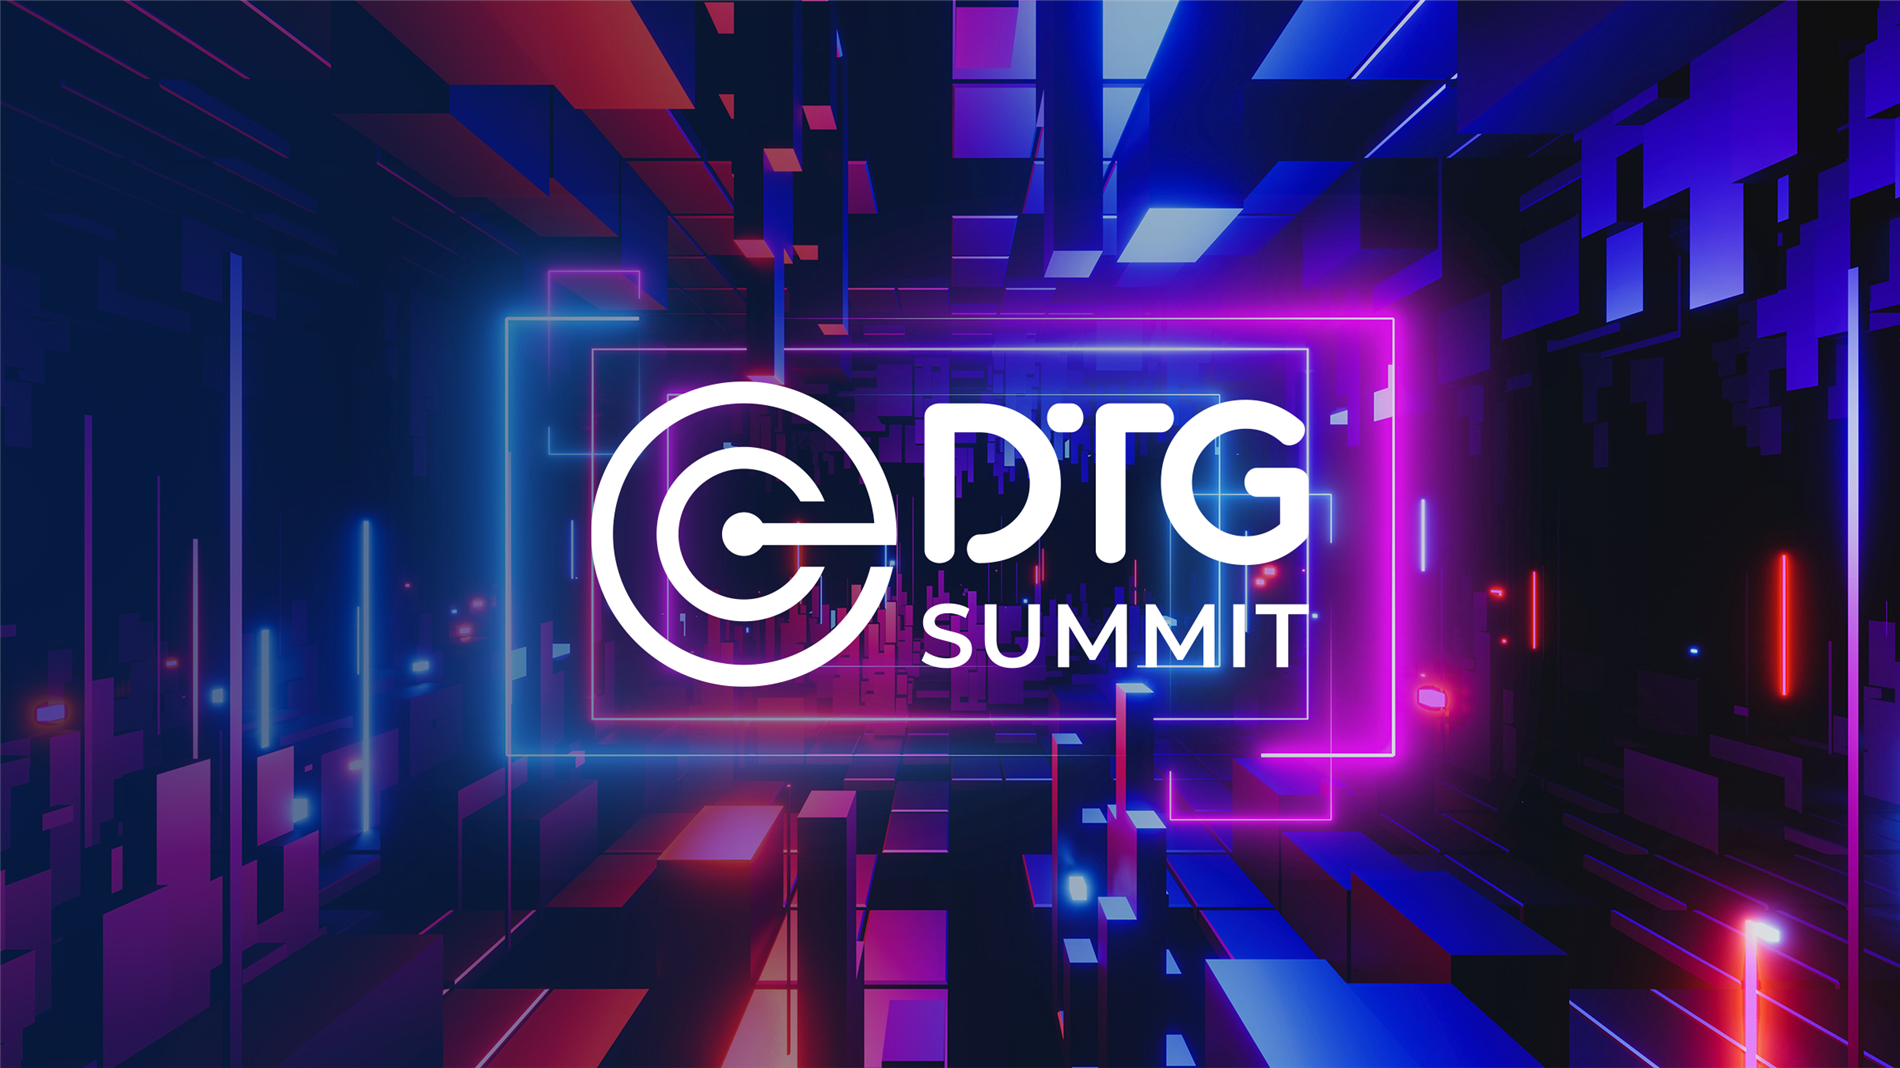 Fincons is taking part in DTG Summit as an official Event Supporter